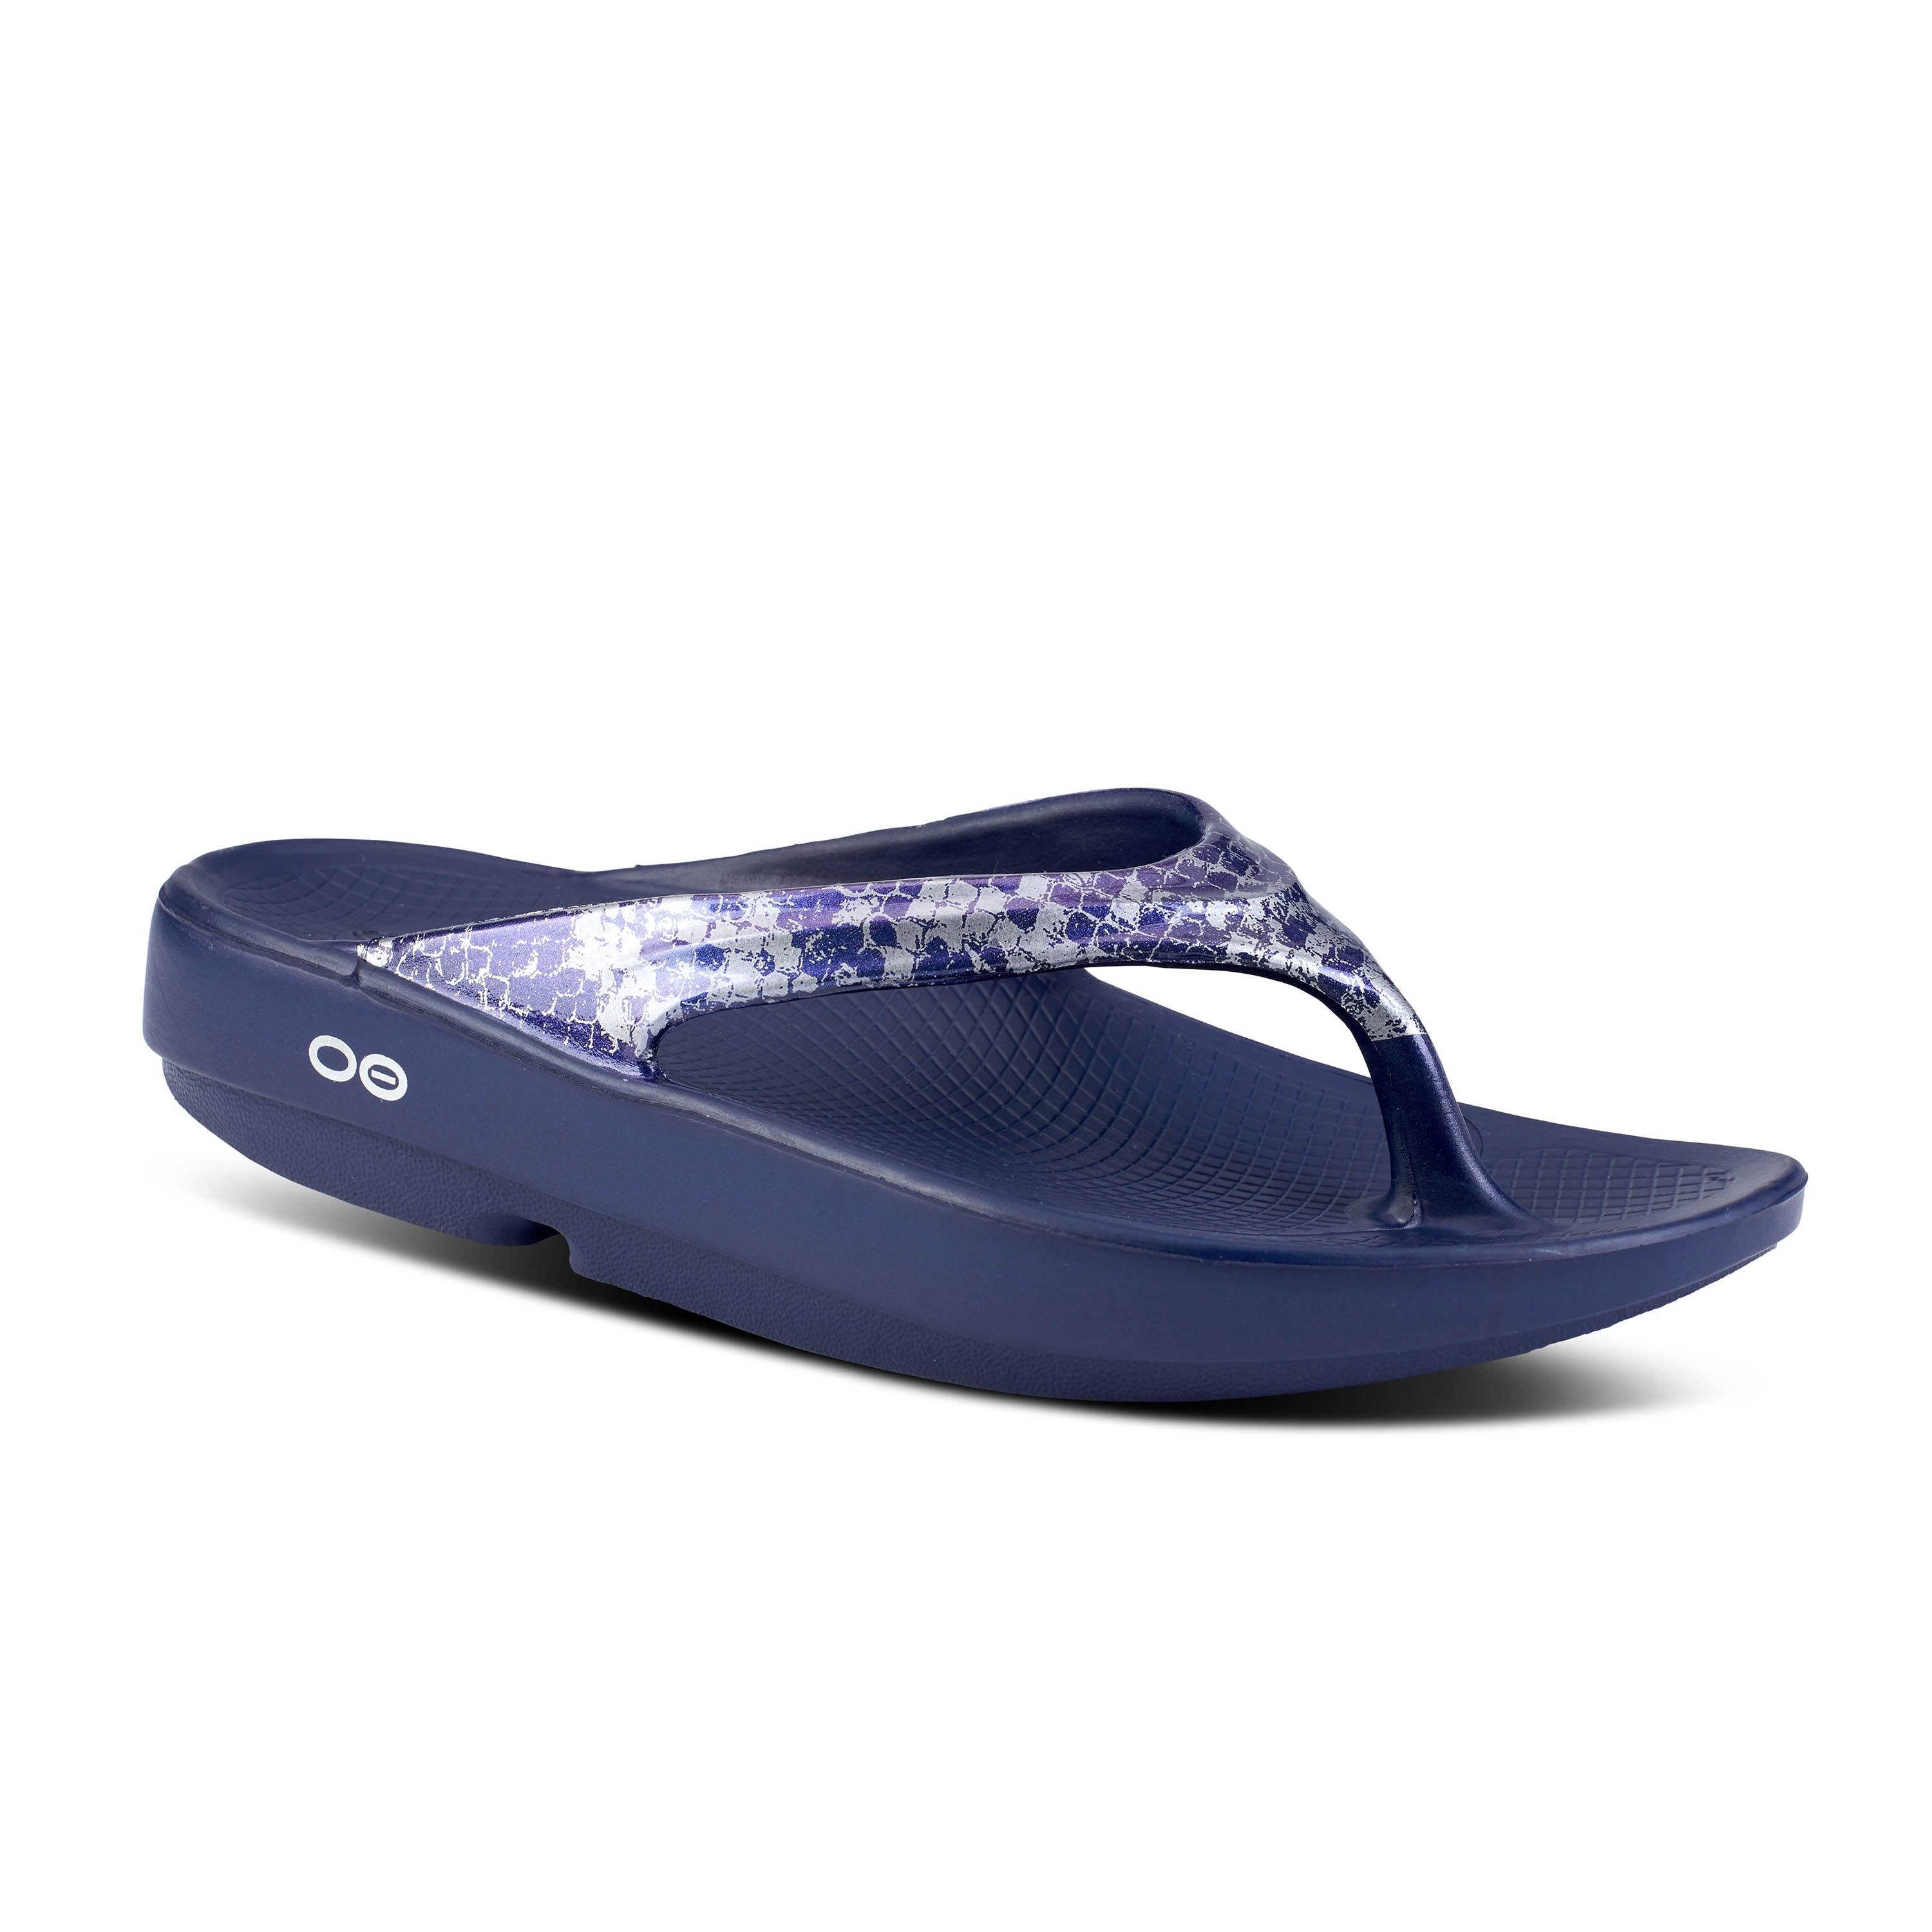 OOFOS WOMEN'S OOLALA LIMITED SANDAL - NAVY/SILVER SNAKE - CLEARANCE 